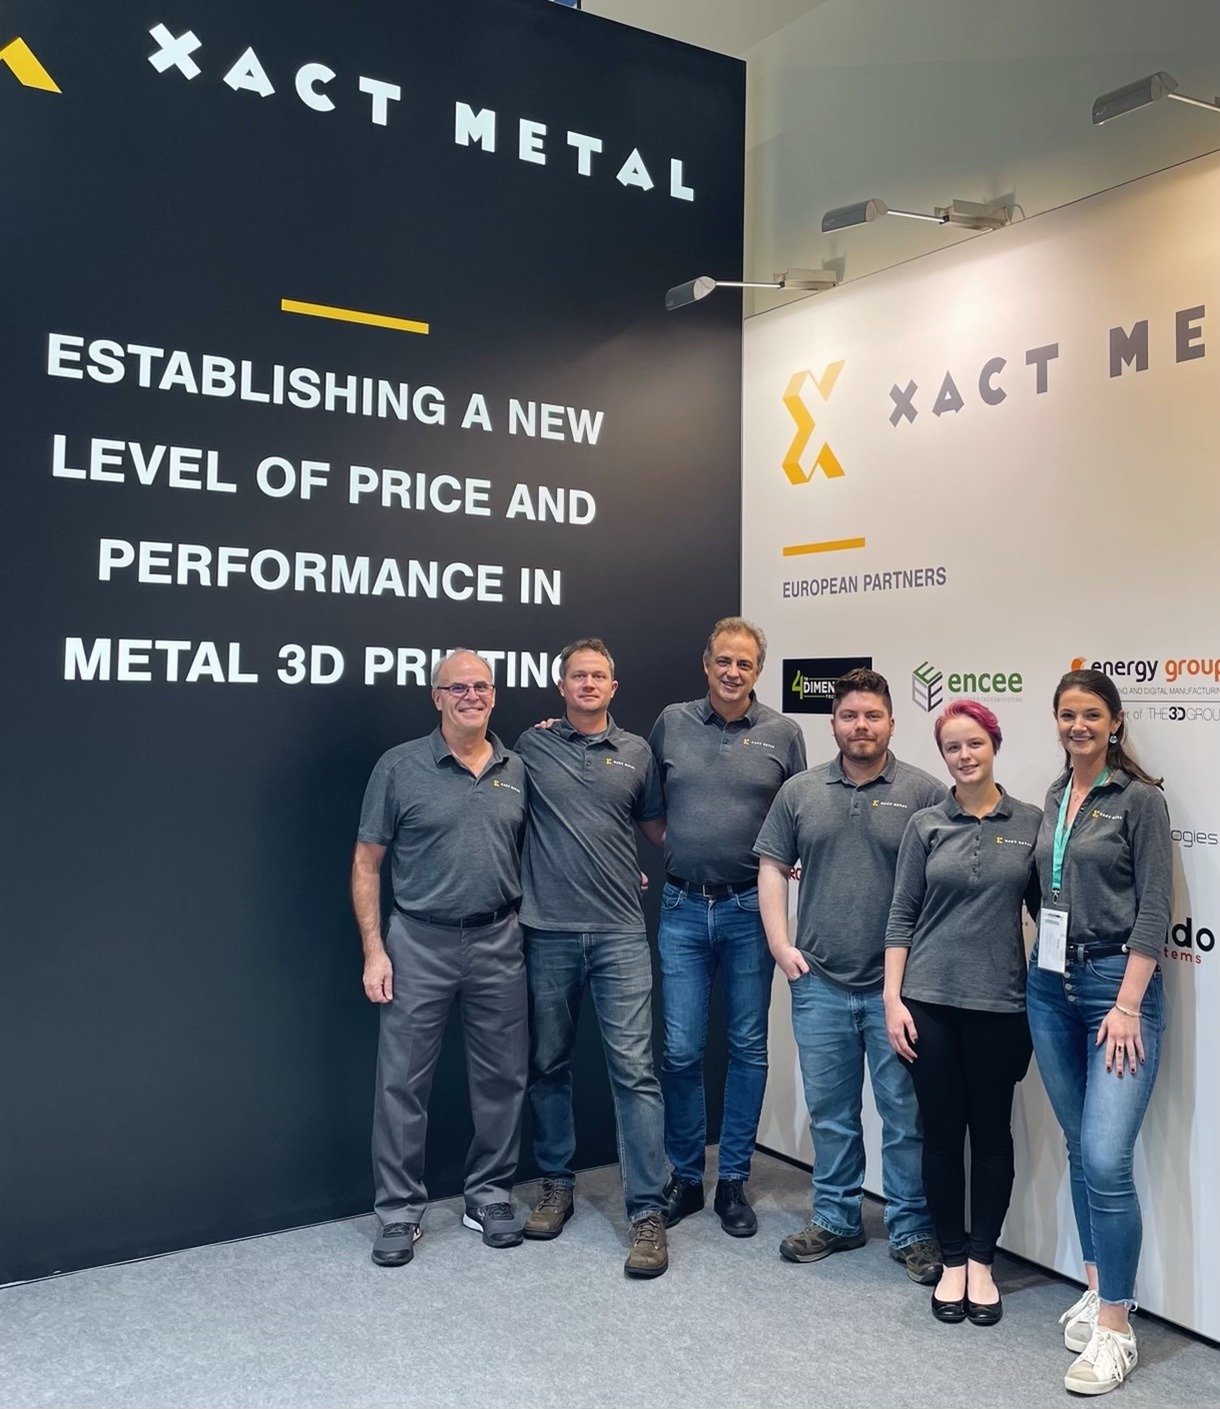 Xact Metal, metal 3d printer manufacturer takes group photo at Formnext, the largest additive manufacturing conference in the world.